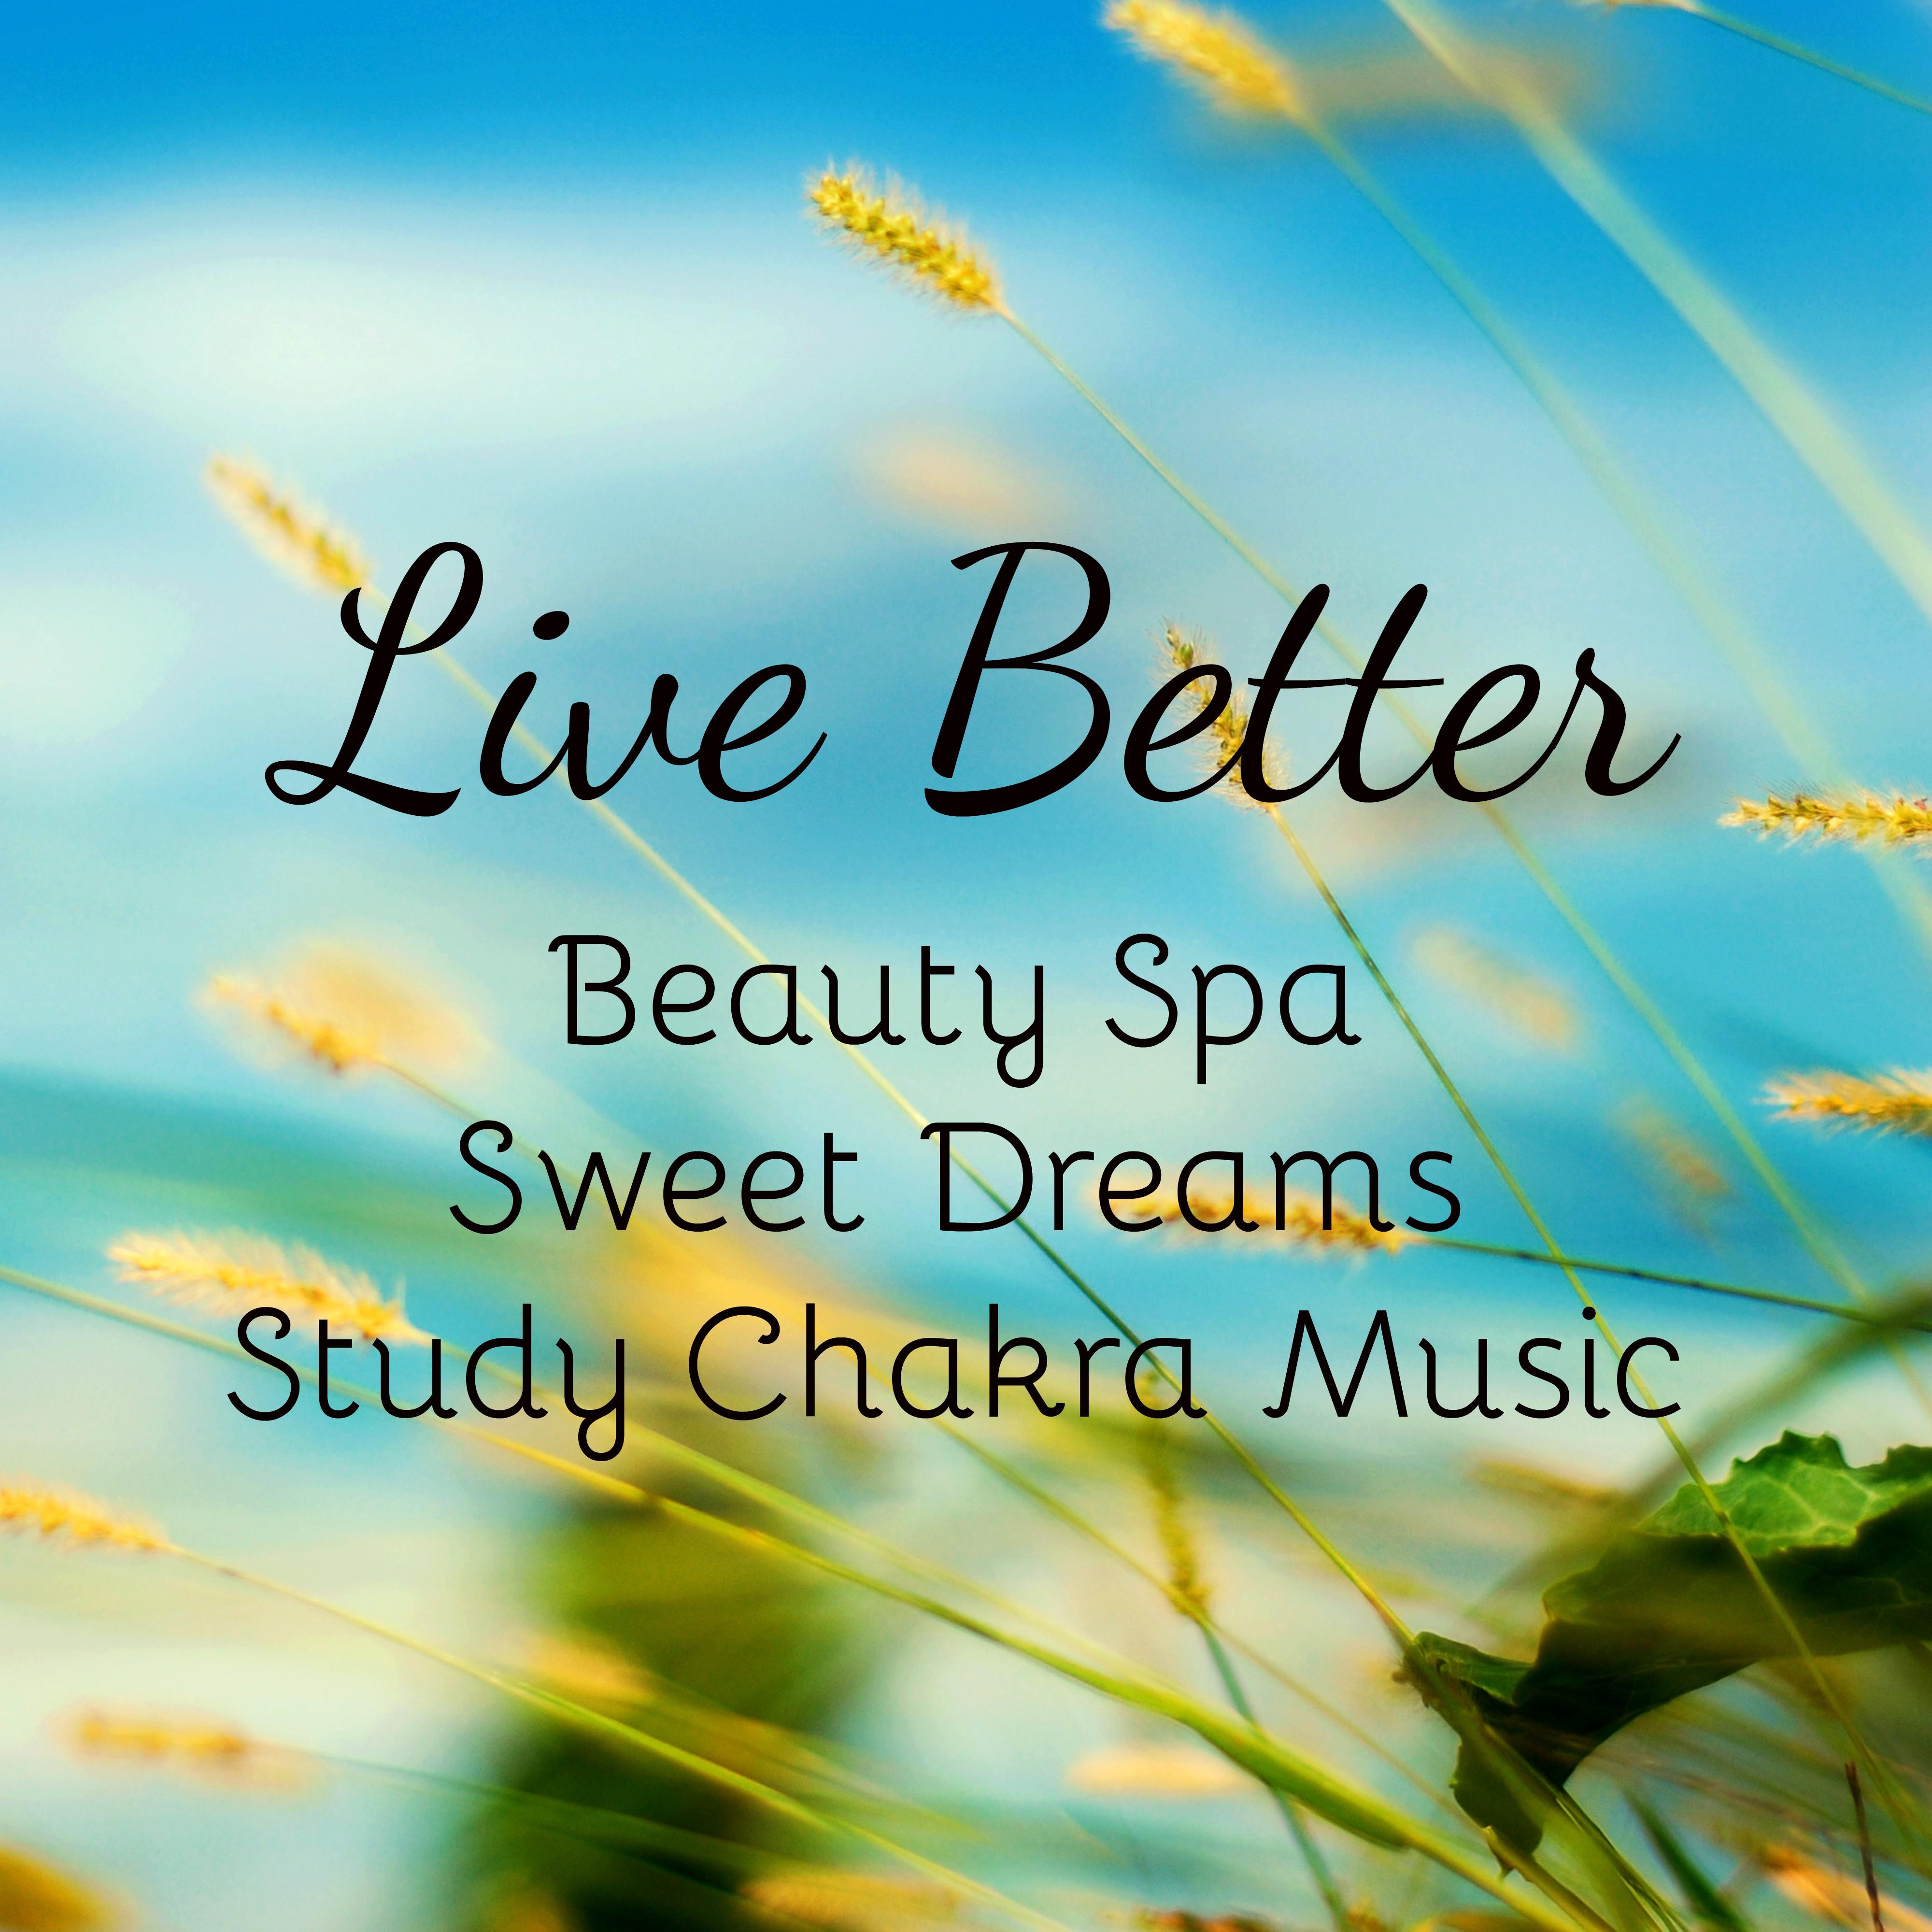 Live Better - Beauty Spa Sweet Dreams Study Chakra Music for Soft Life Mind Exercises and Natural Treatment